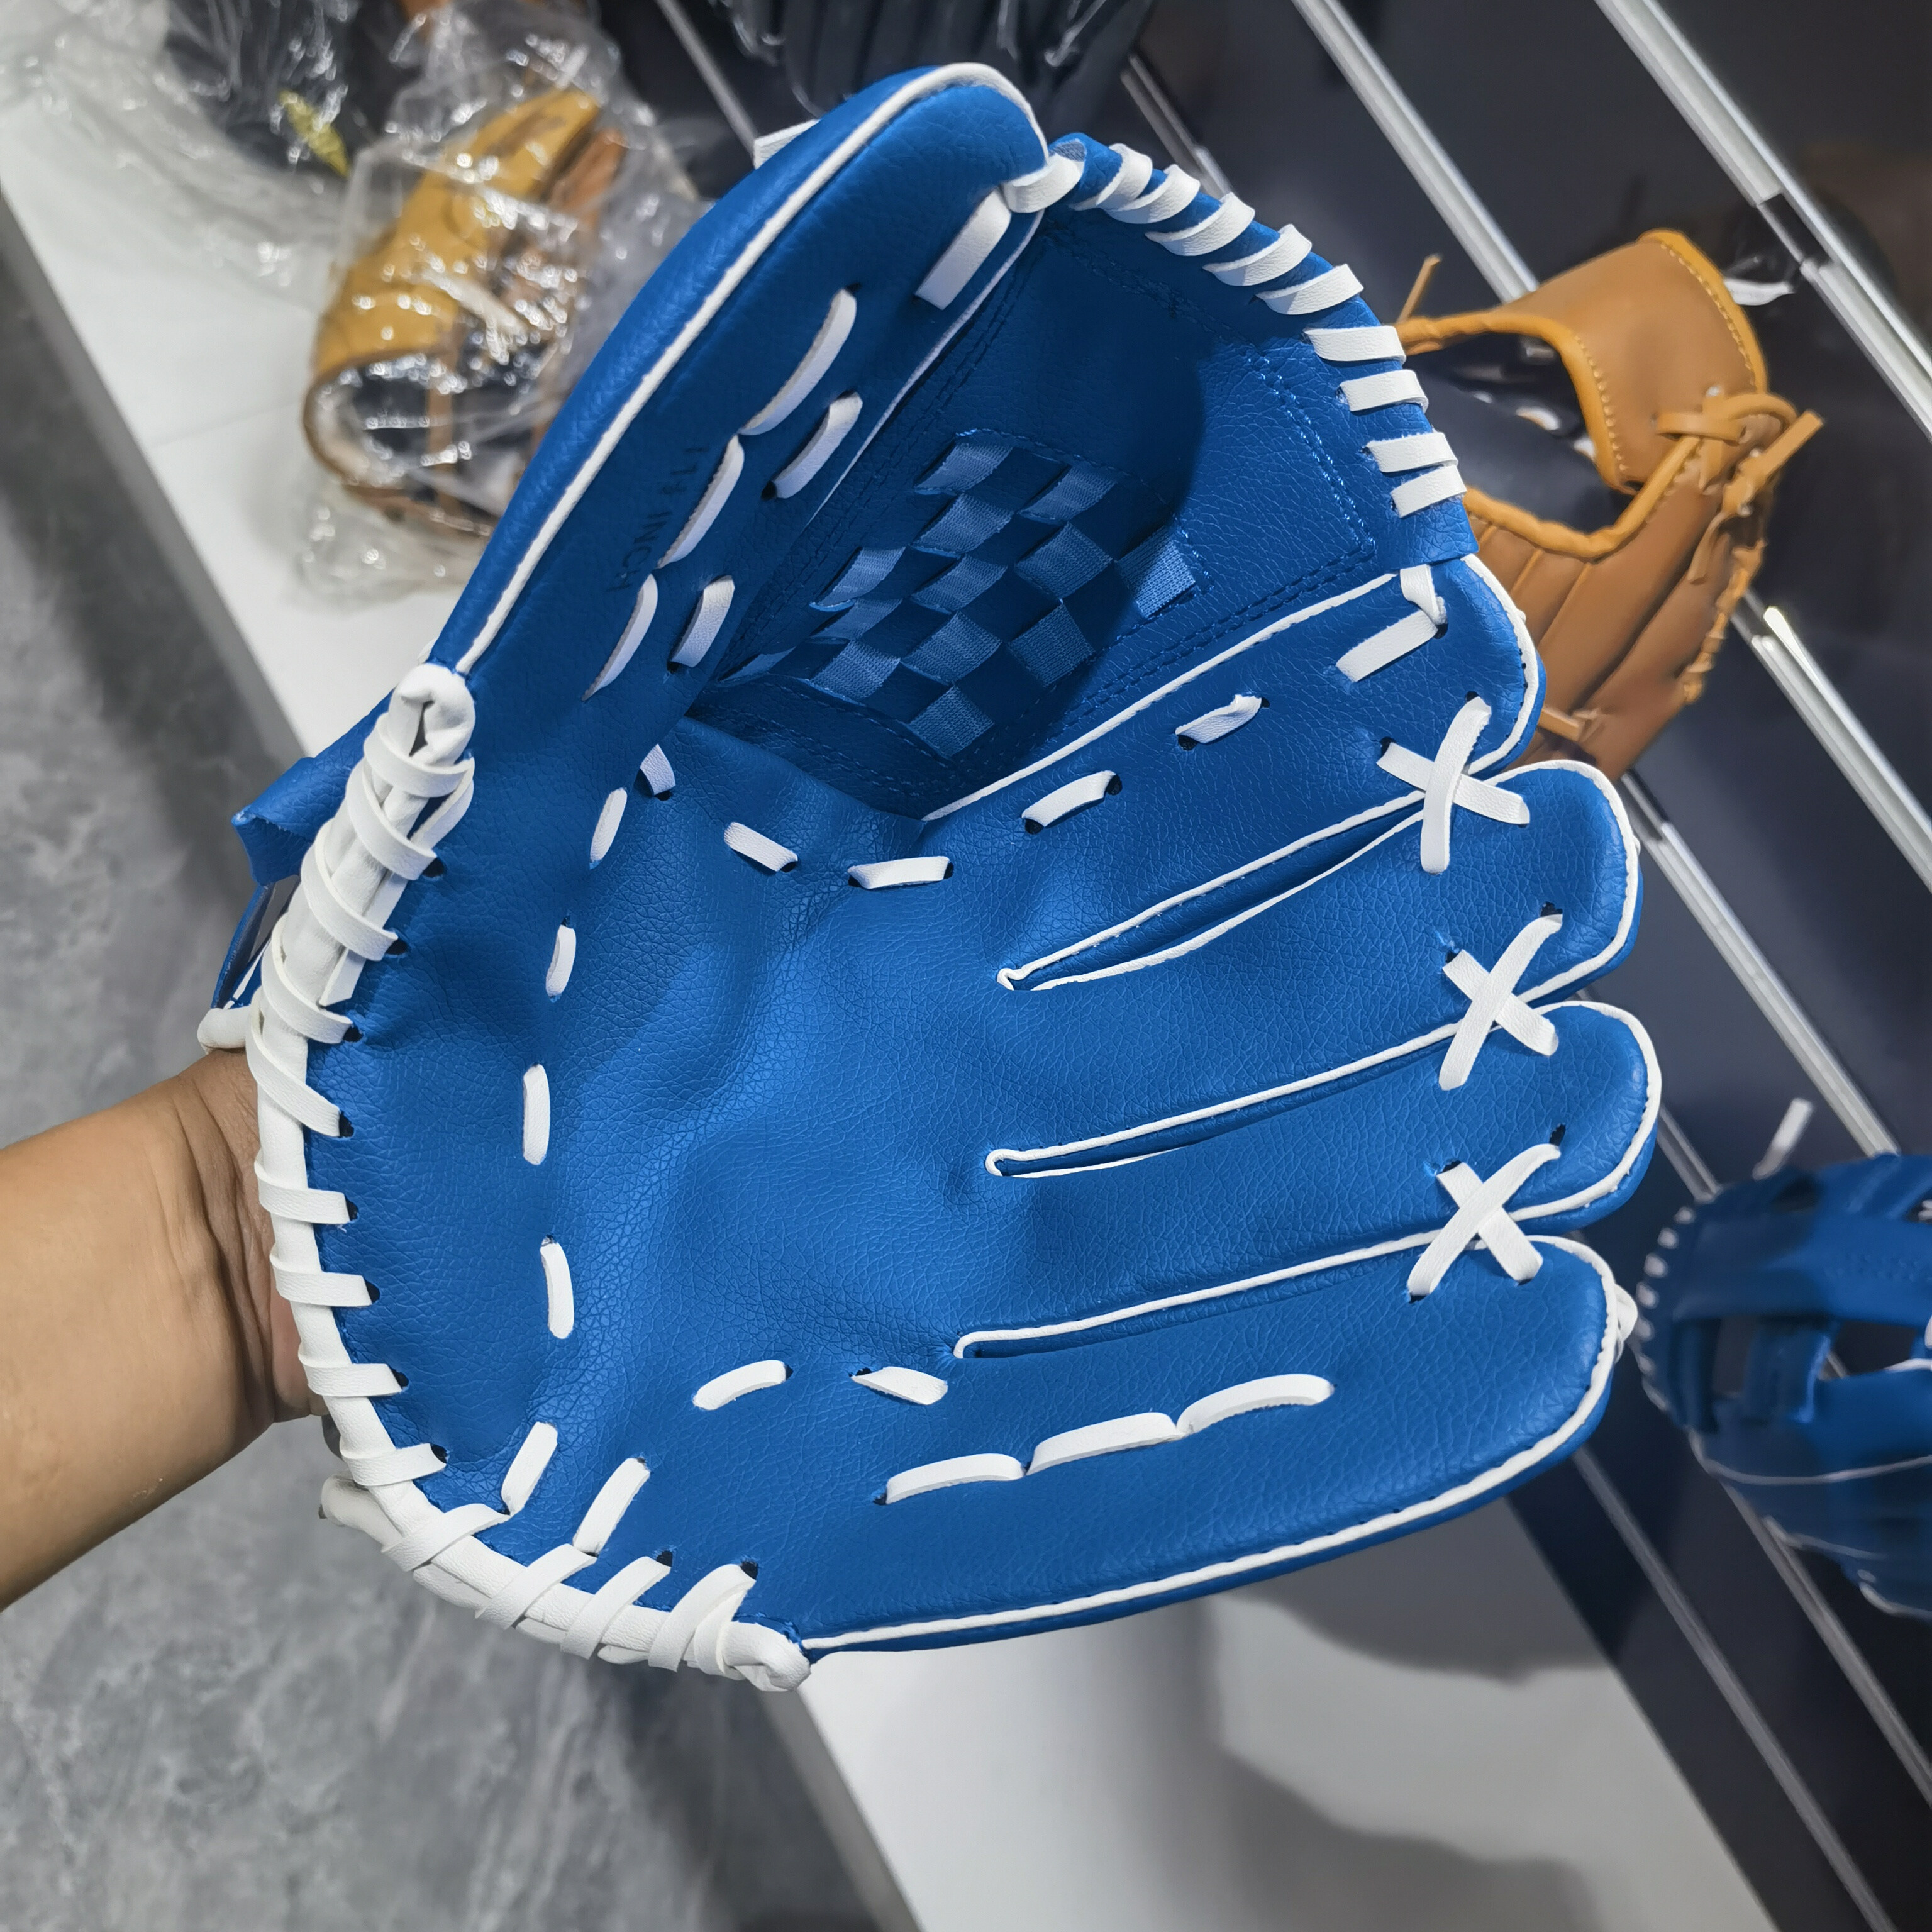 Soft Pu Baseball Gloves For Kids & Adults - Perfect For Parent